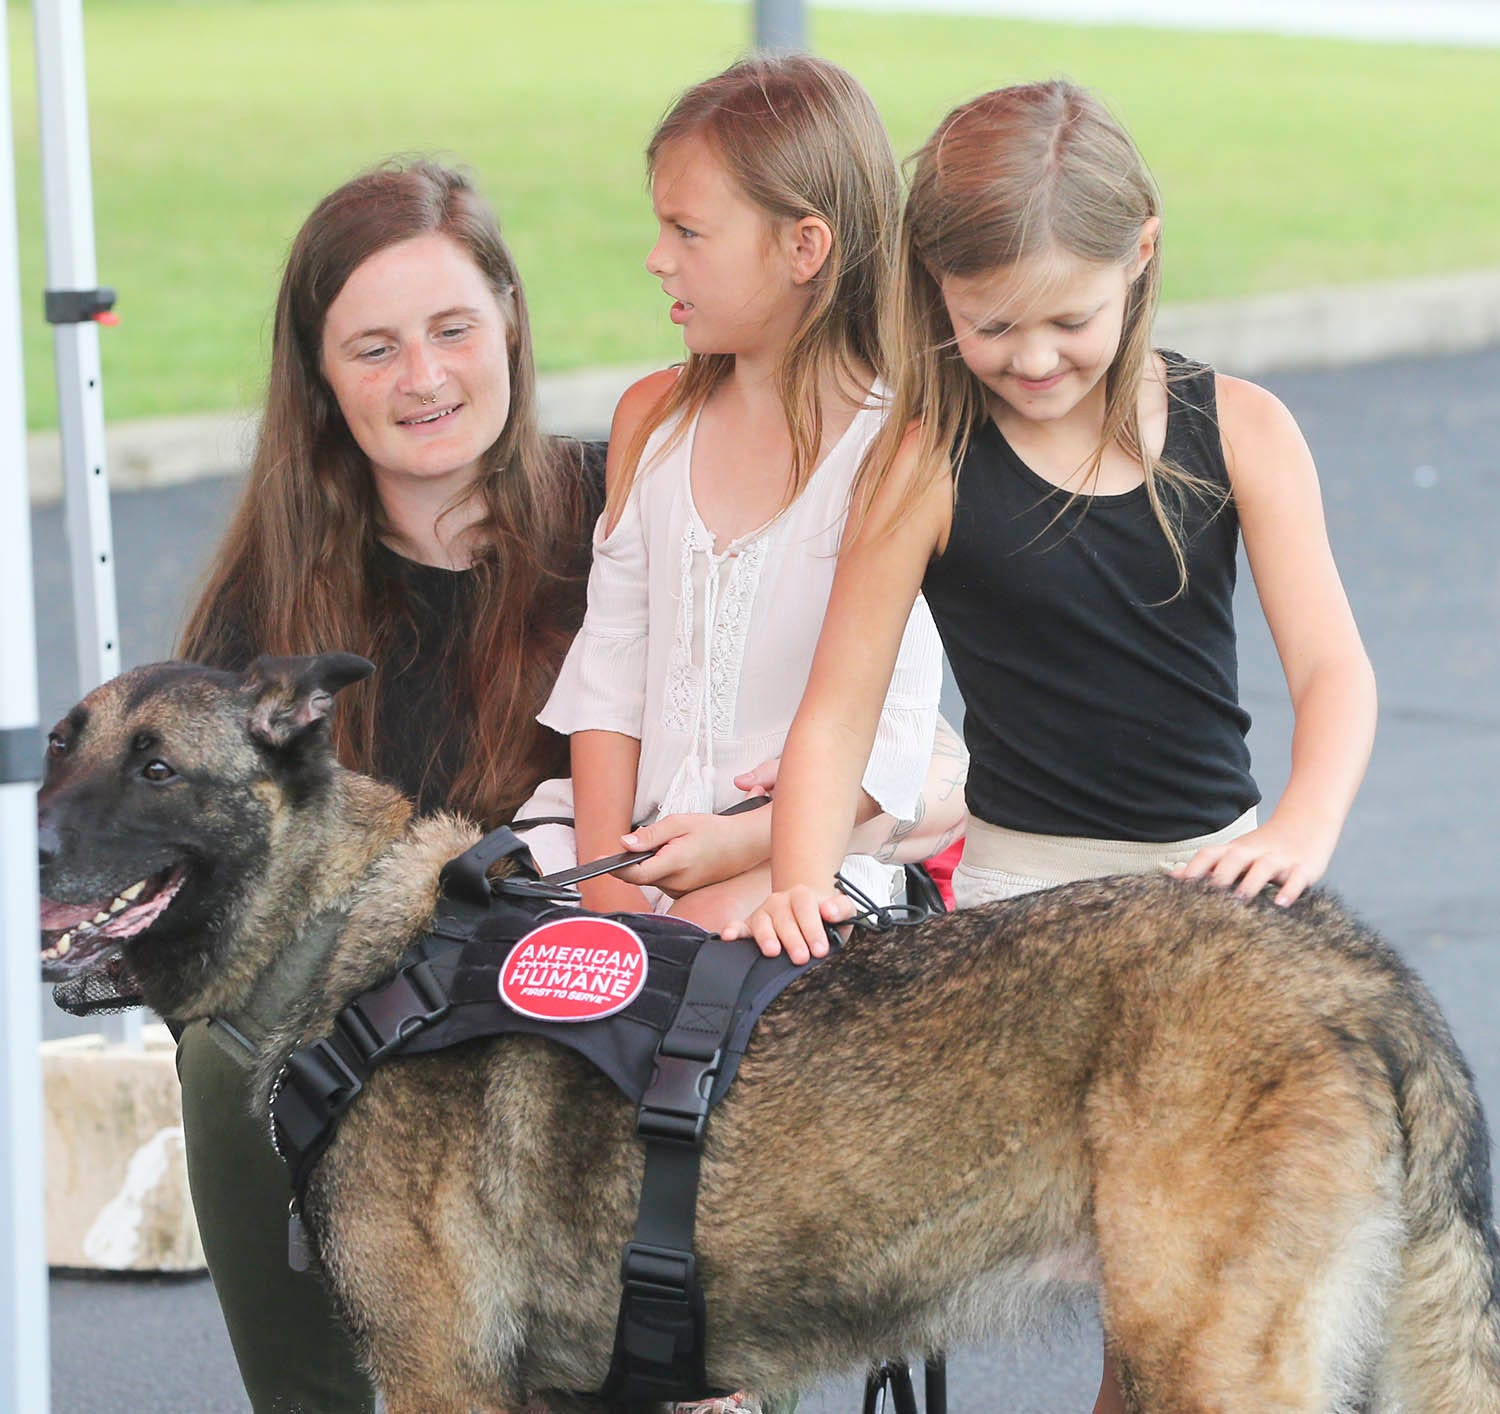 Staff Sgt. Porschia Allio-Easom, with daughters Shaylee and Ruby, gives attention to retired military dog Luna in a reunion event at the Eglin Federal Credit Union on Eglin Parkway in Fort Walton Beach.